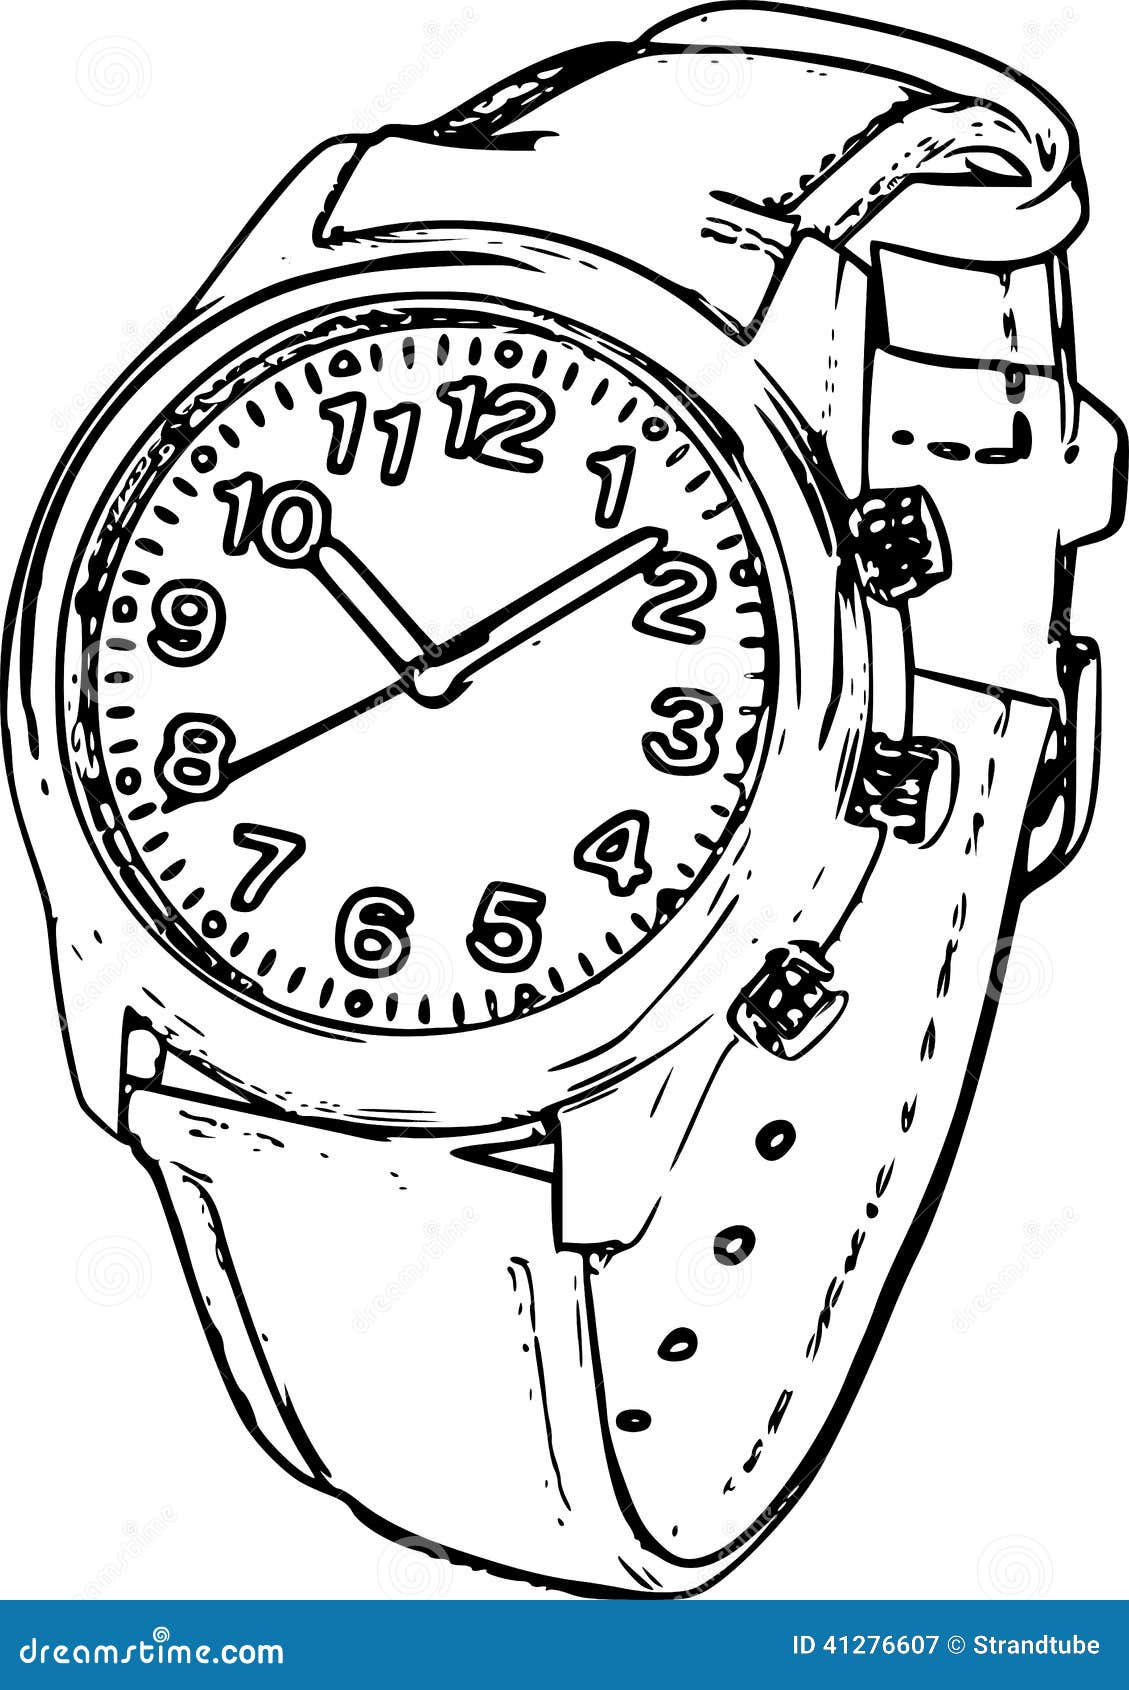 wrist watch clipart black and white - photo #8